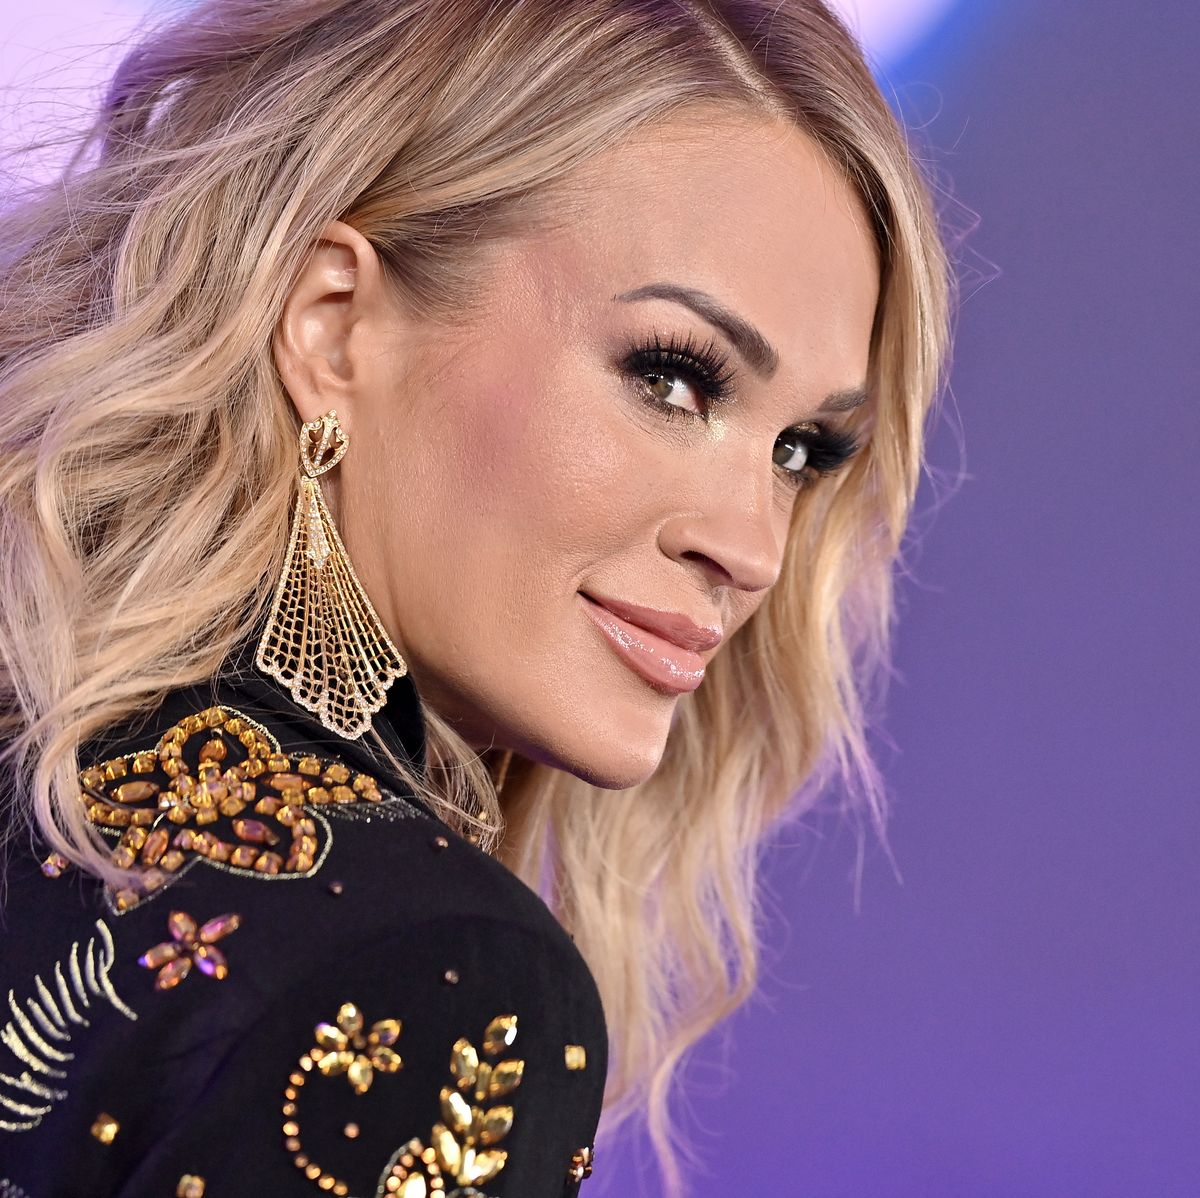 Carrie Underwood Announces New Tour Dates to Mix Reaction From Fans